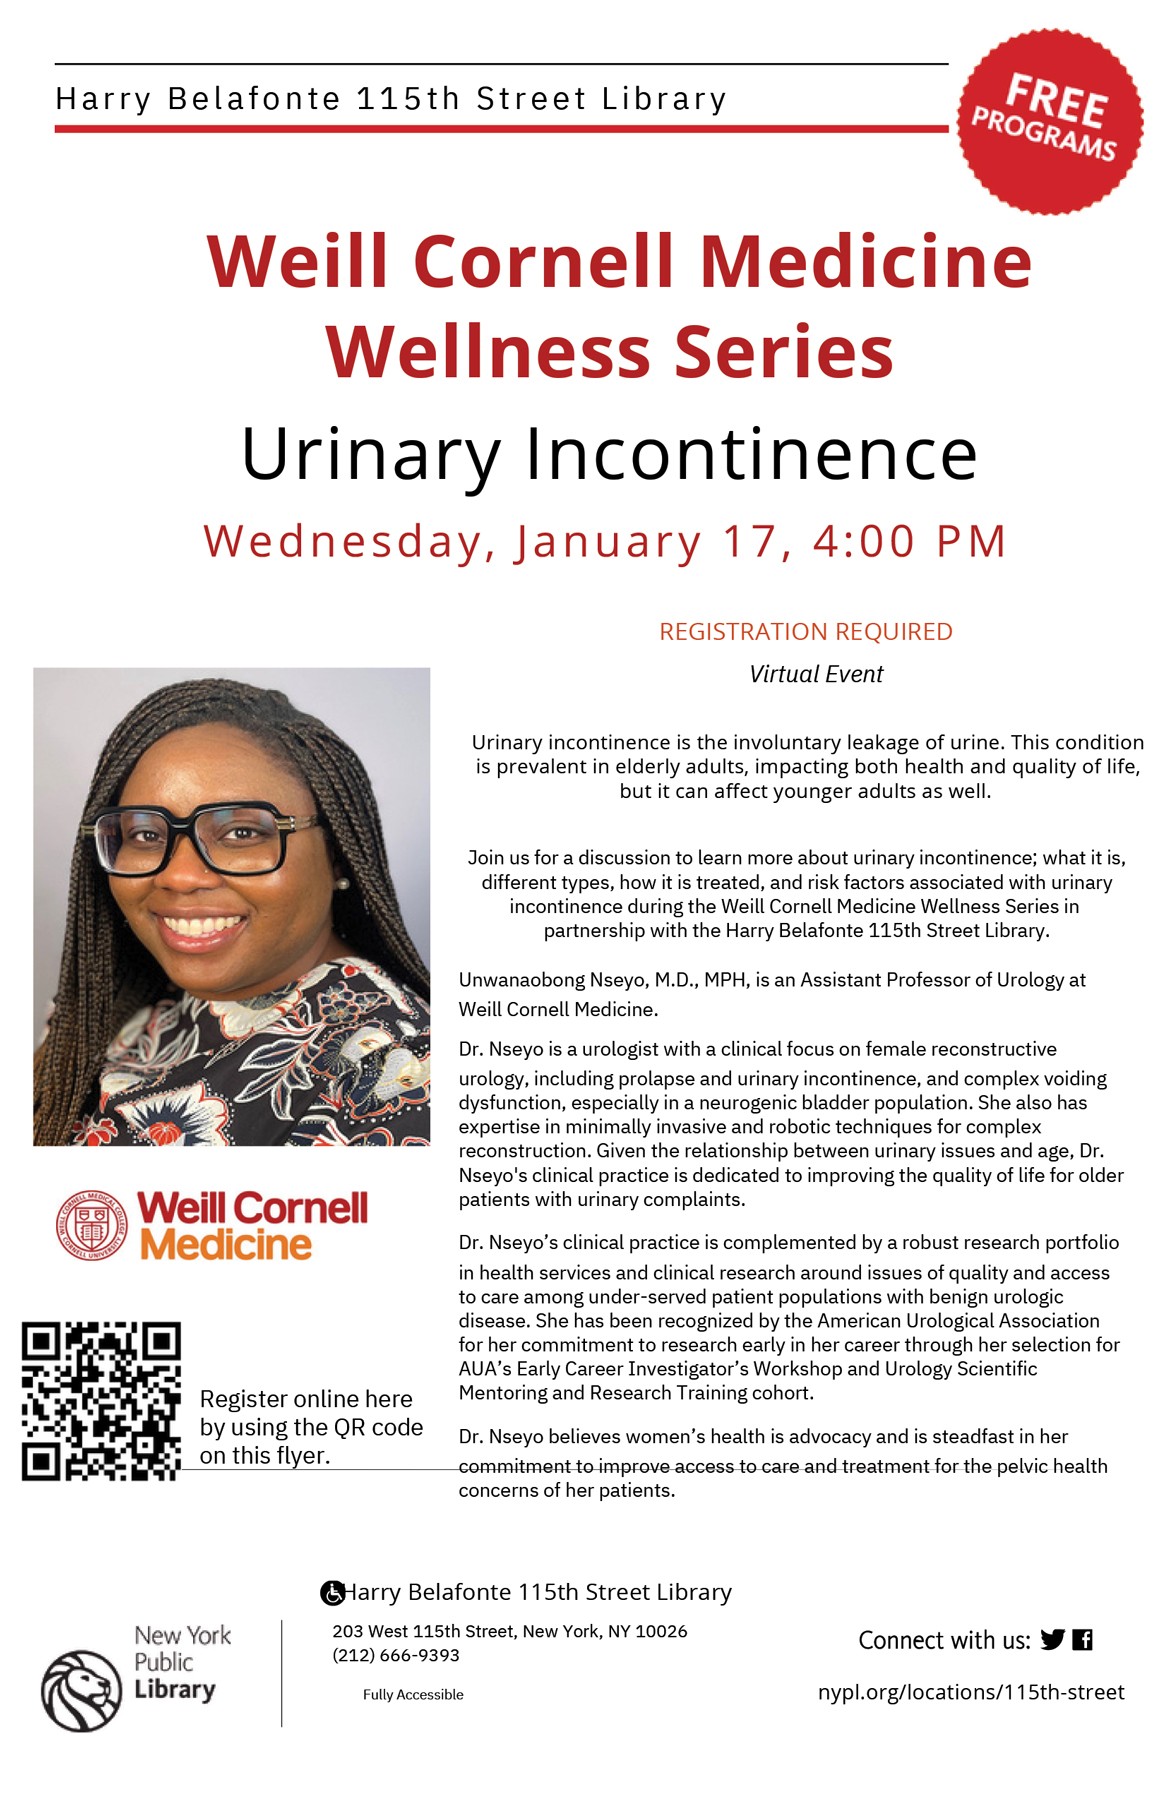 Poster for wellness series event.